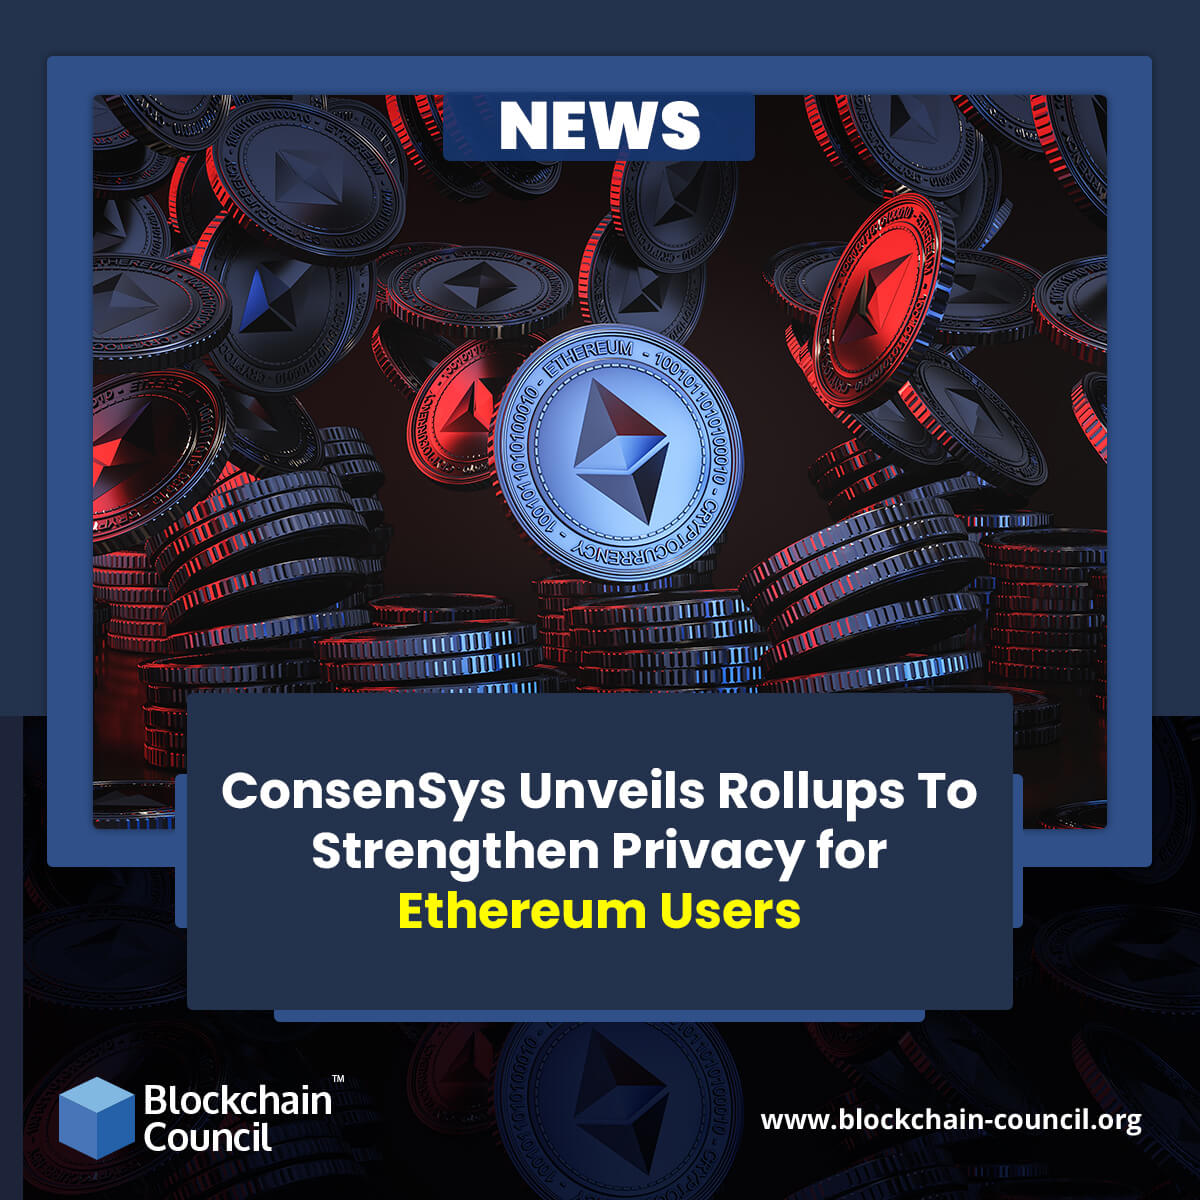 ConsenSys Unveils Rollups To Strengthen Privacy for Ethereum Users